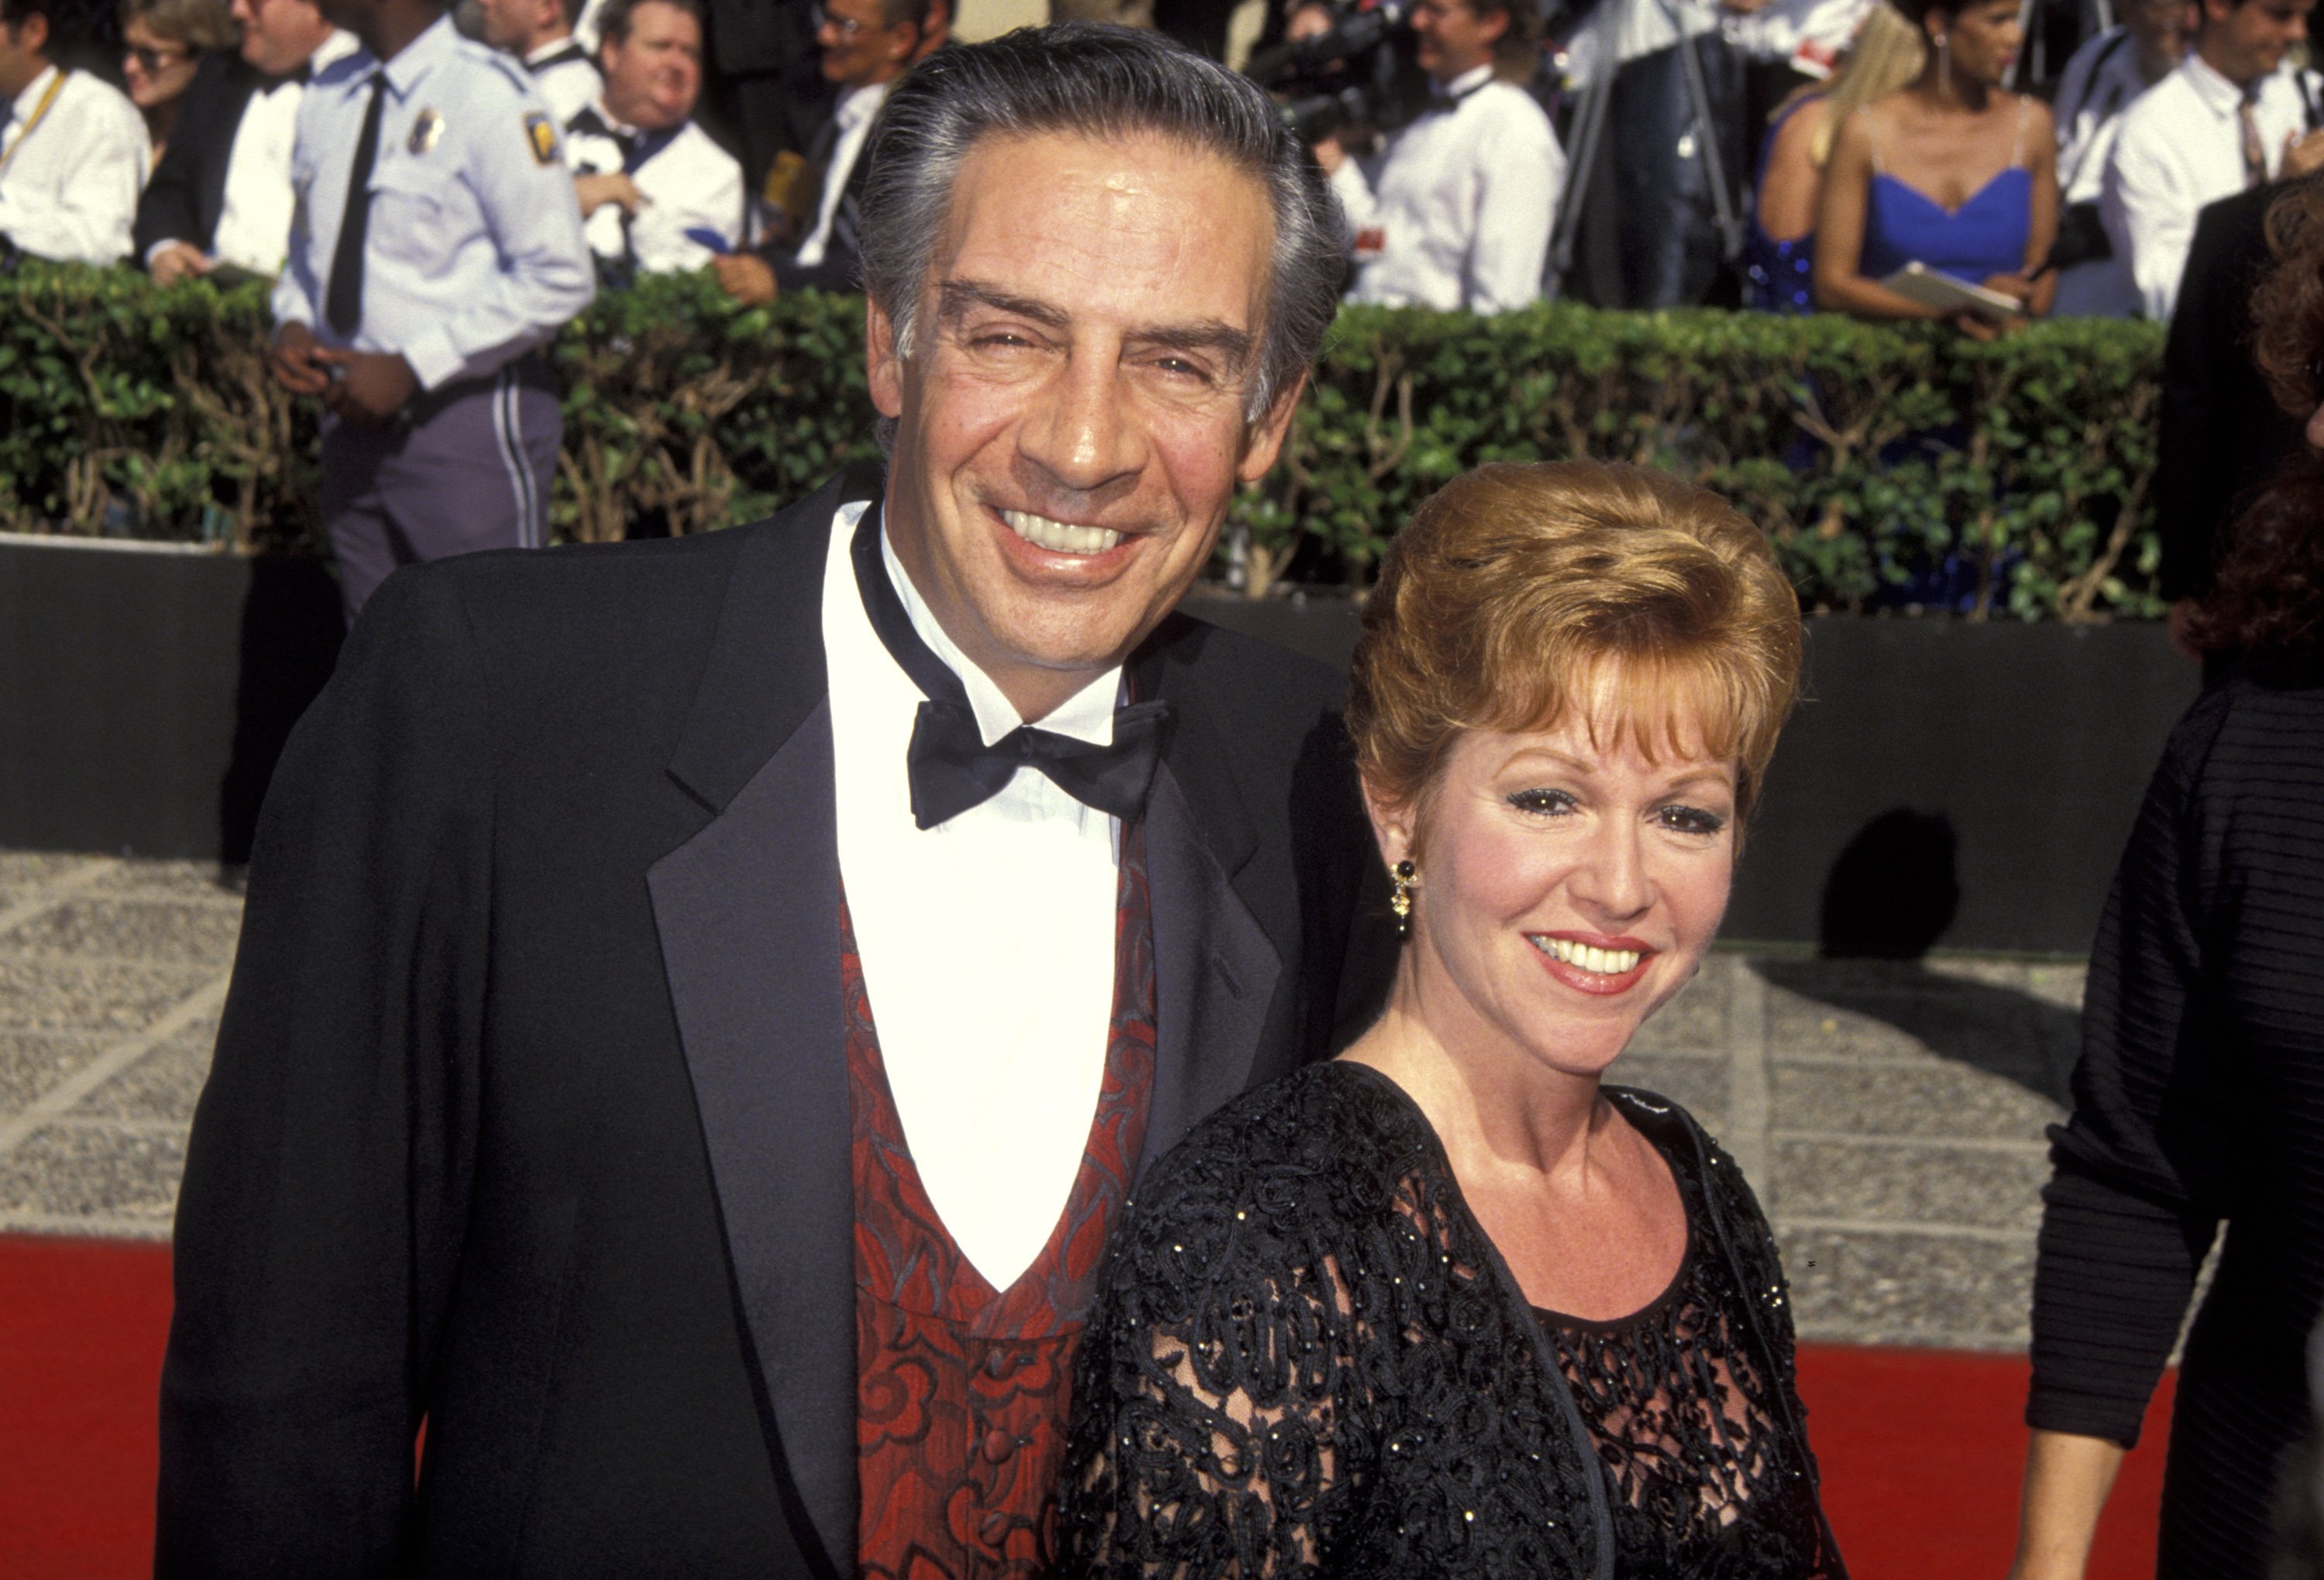 Jerry Orbach and Elaine Orbach during 44th Annual Emmy Awards at Pasadena Civic Center in Pasadena, California, United States. | Source: Getty Images